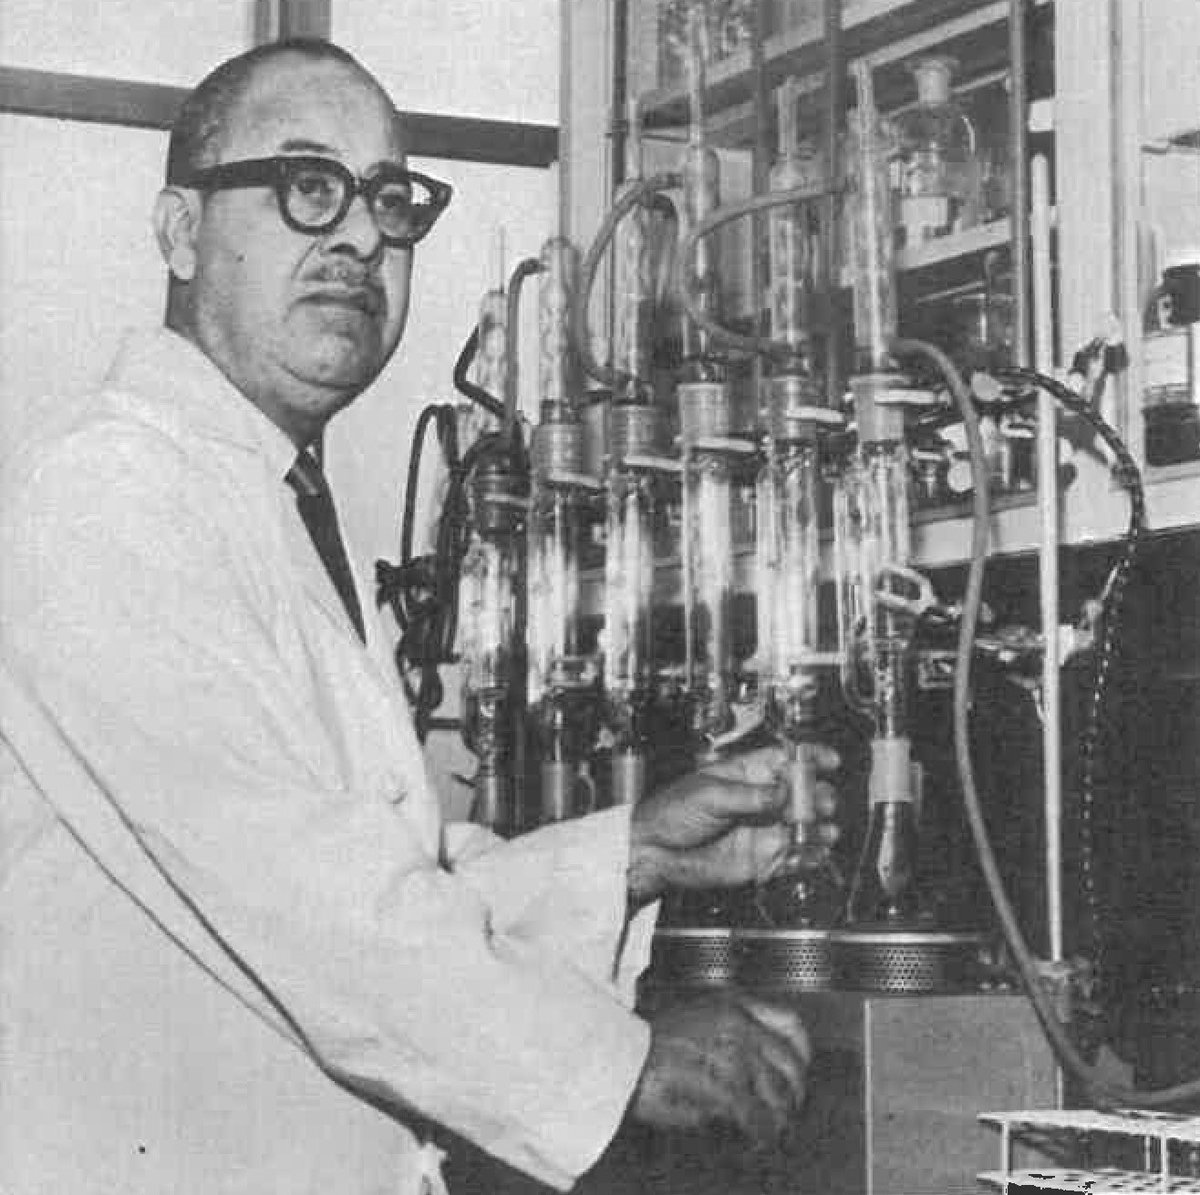 #FlashblackFriday Dr. Harold West, Chairman of the Department of Biochemistry at Meharry , performed a fractionalization procedure in 1967. 

#MeharryMade #BlackScientists #Researchers